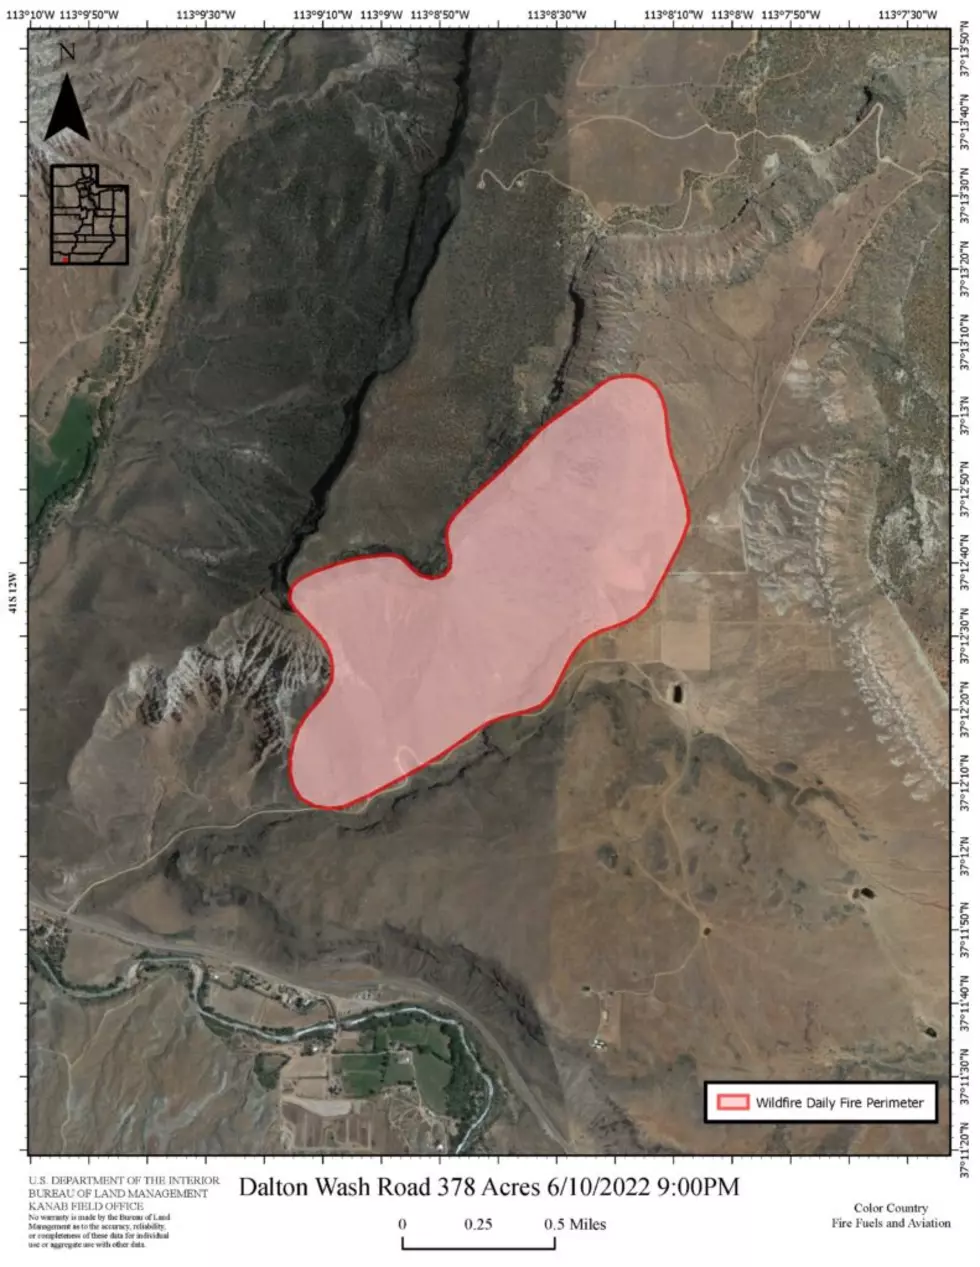 Dalton Wash Fire Mapped At 350 Acres And Is Stable